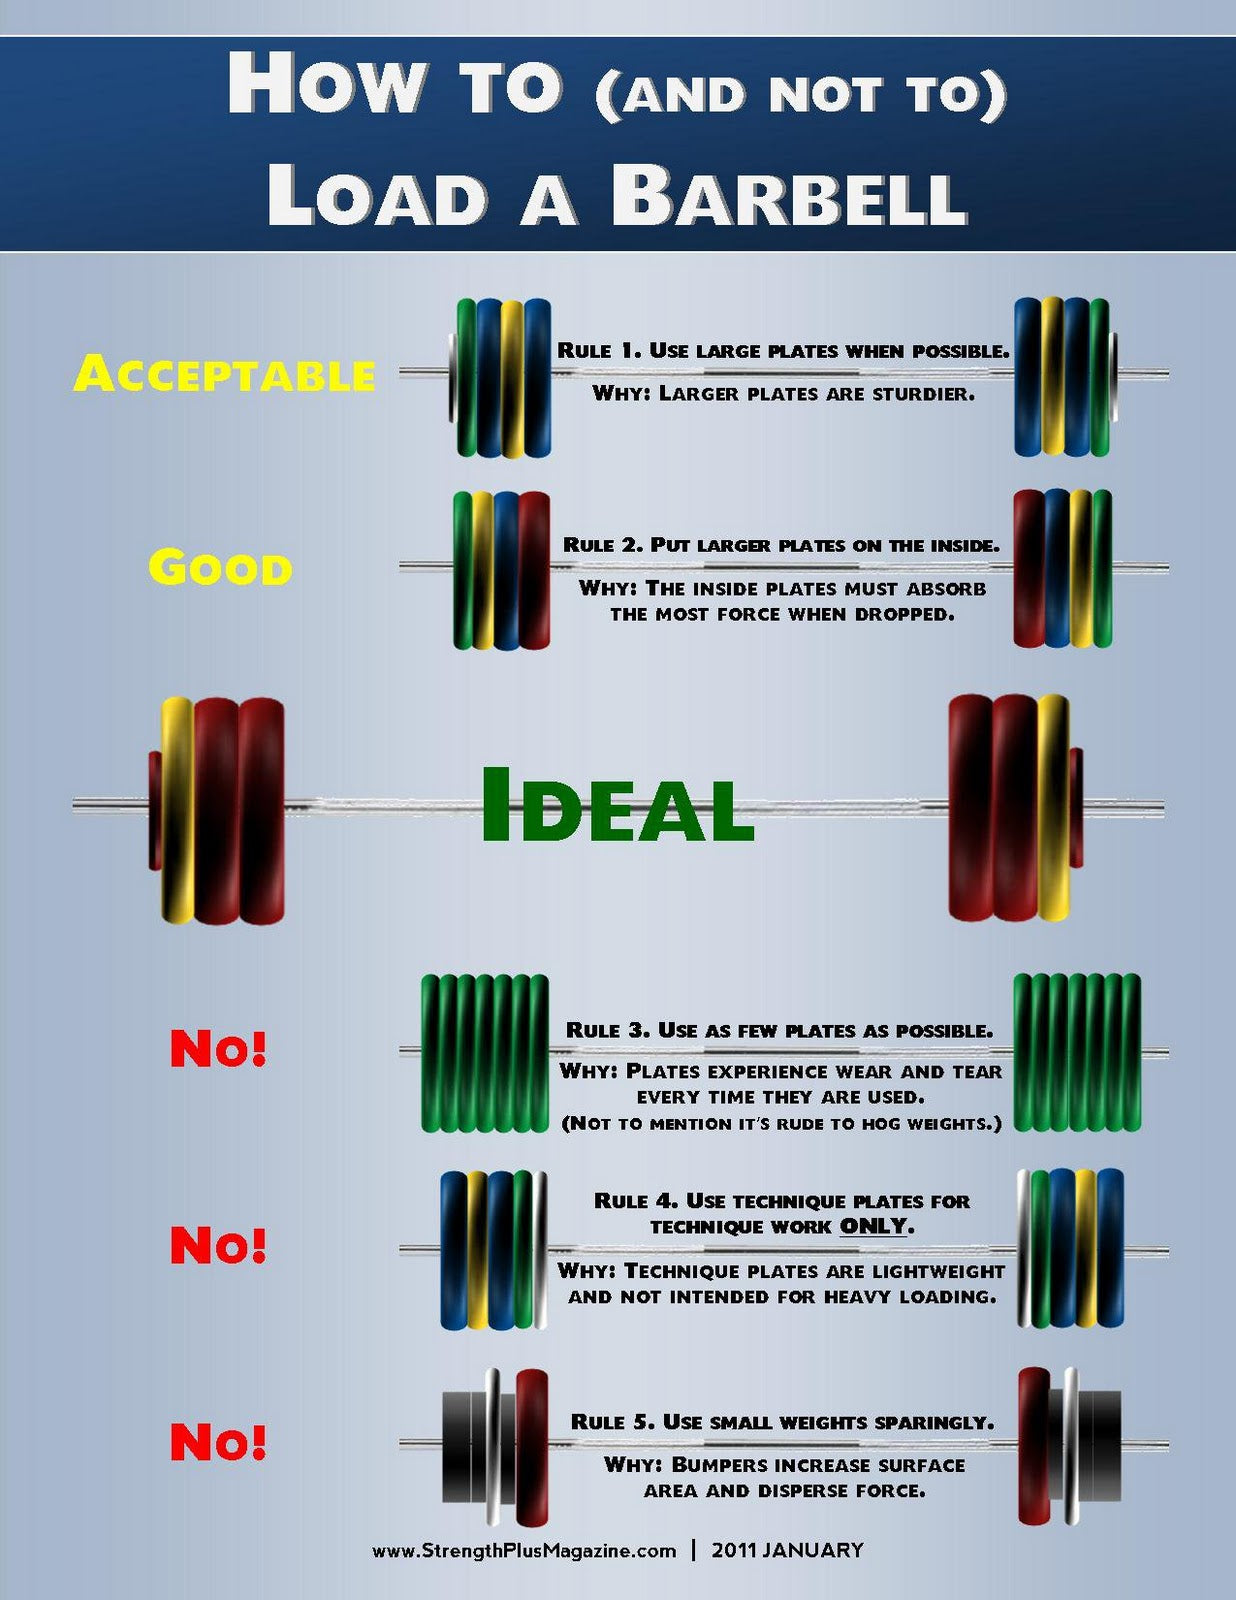 How_to_Load_A_Barbell.jpg (1236×1600)